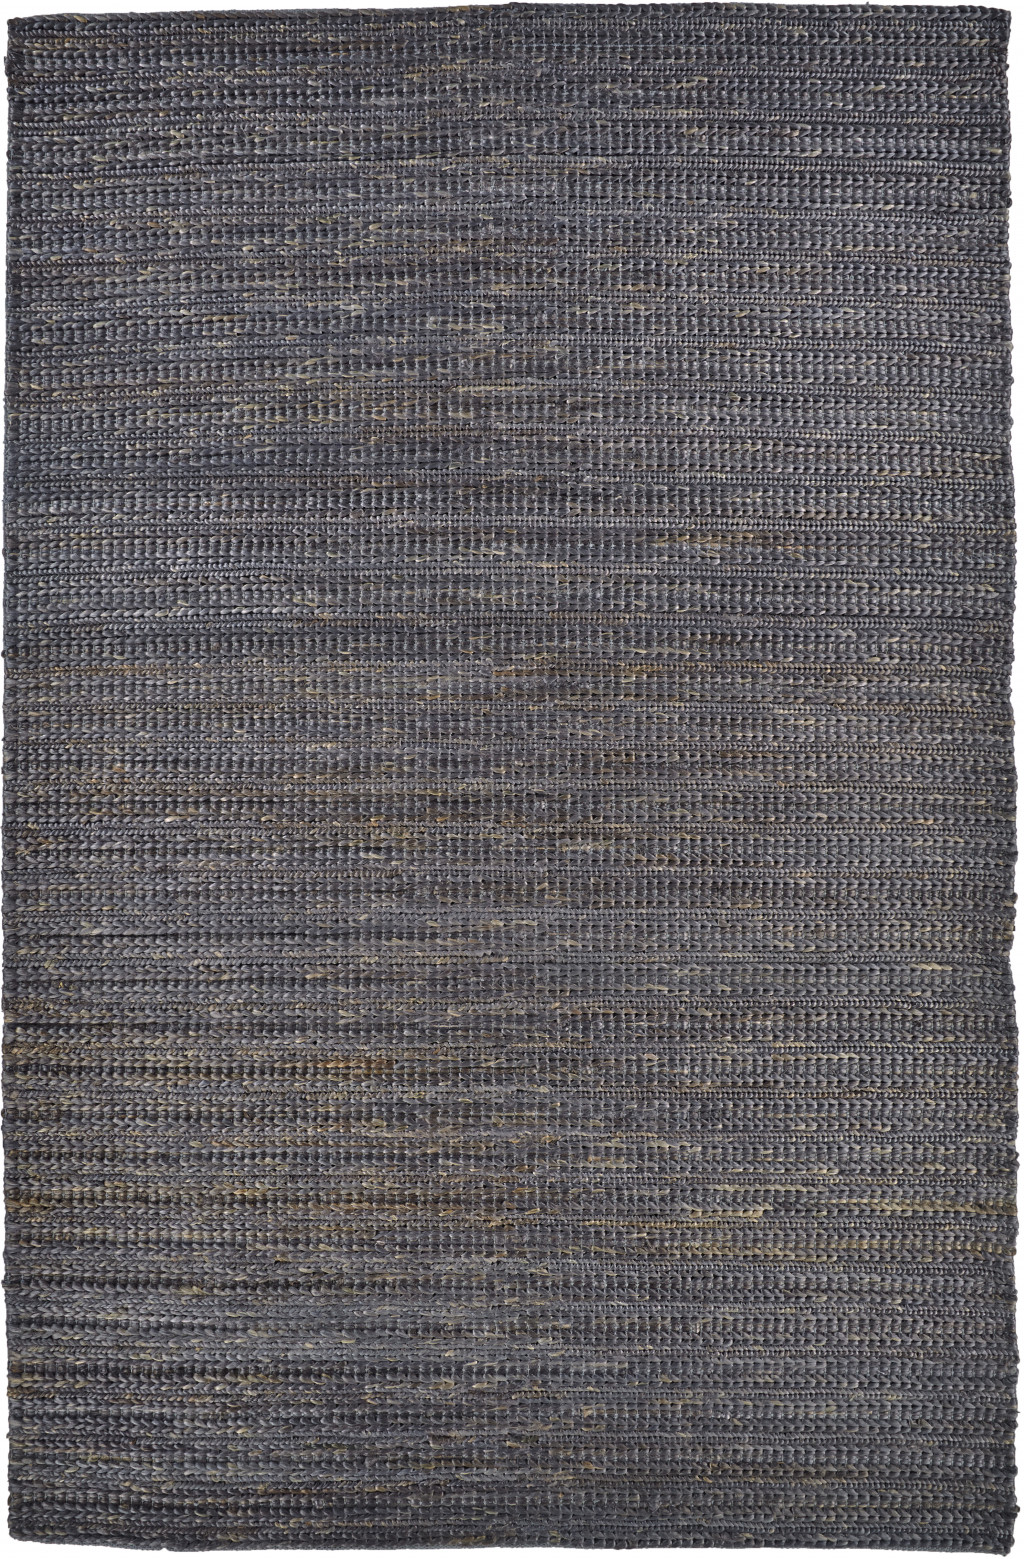 2' X 3' Brown Blue And Taupe Hand Woven Area Rug-511429-1